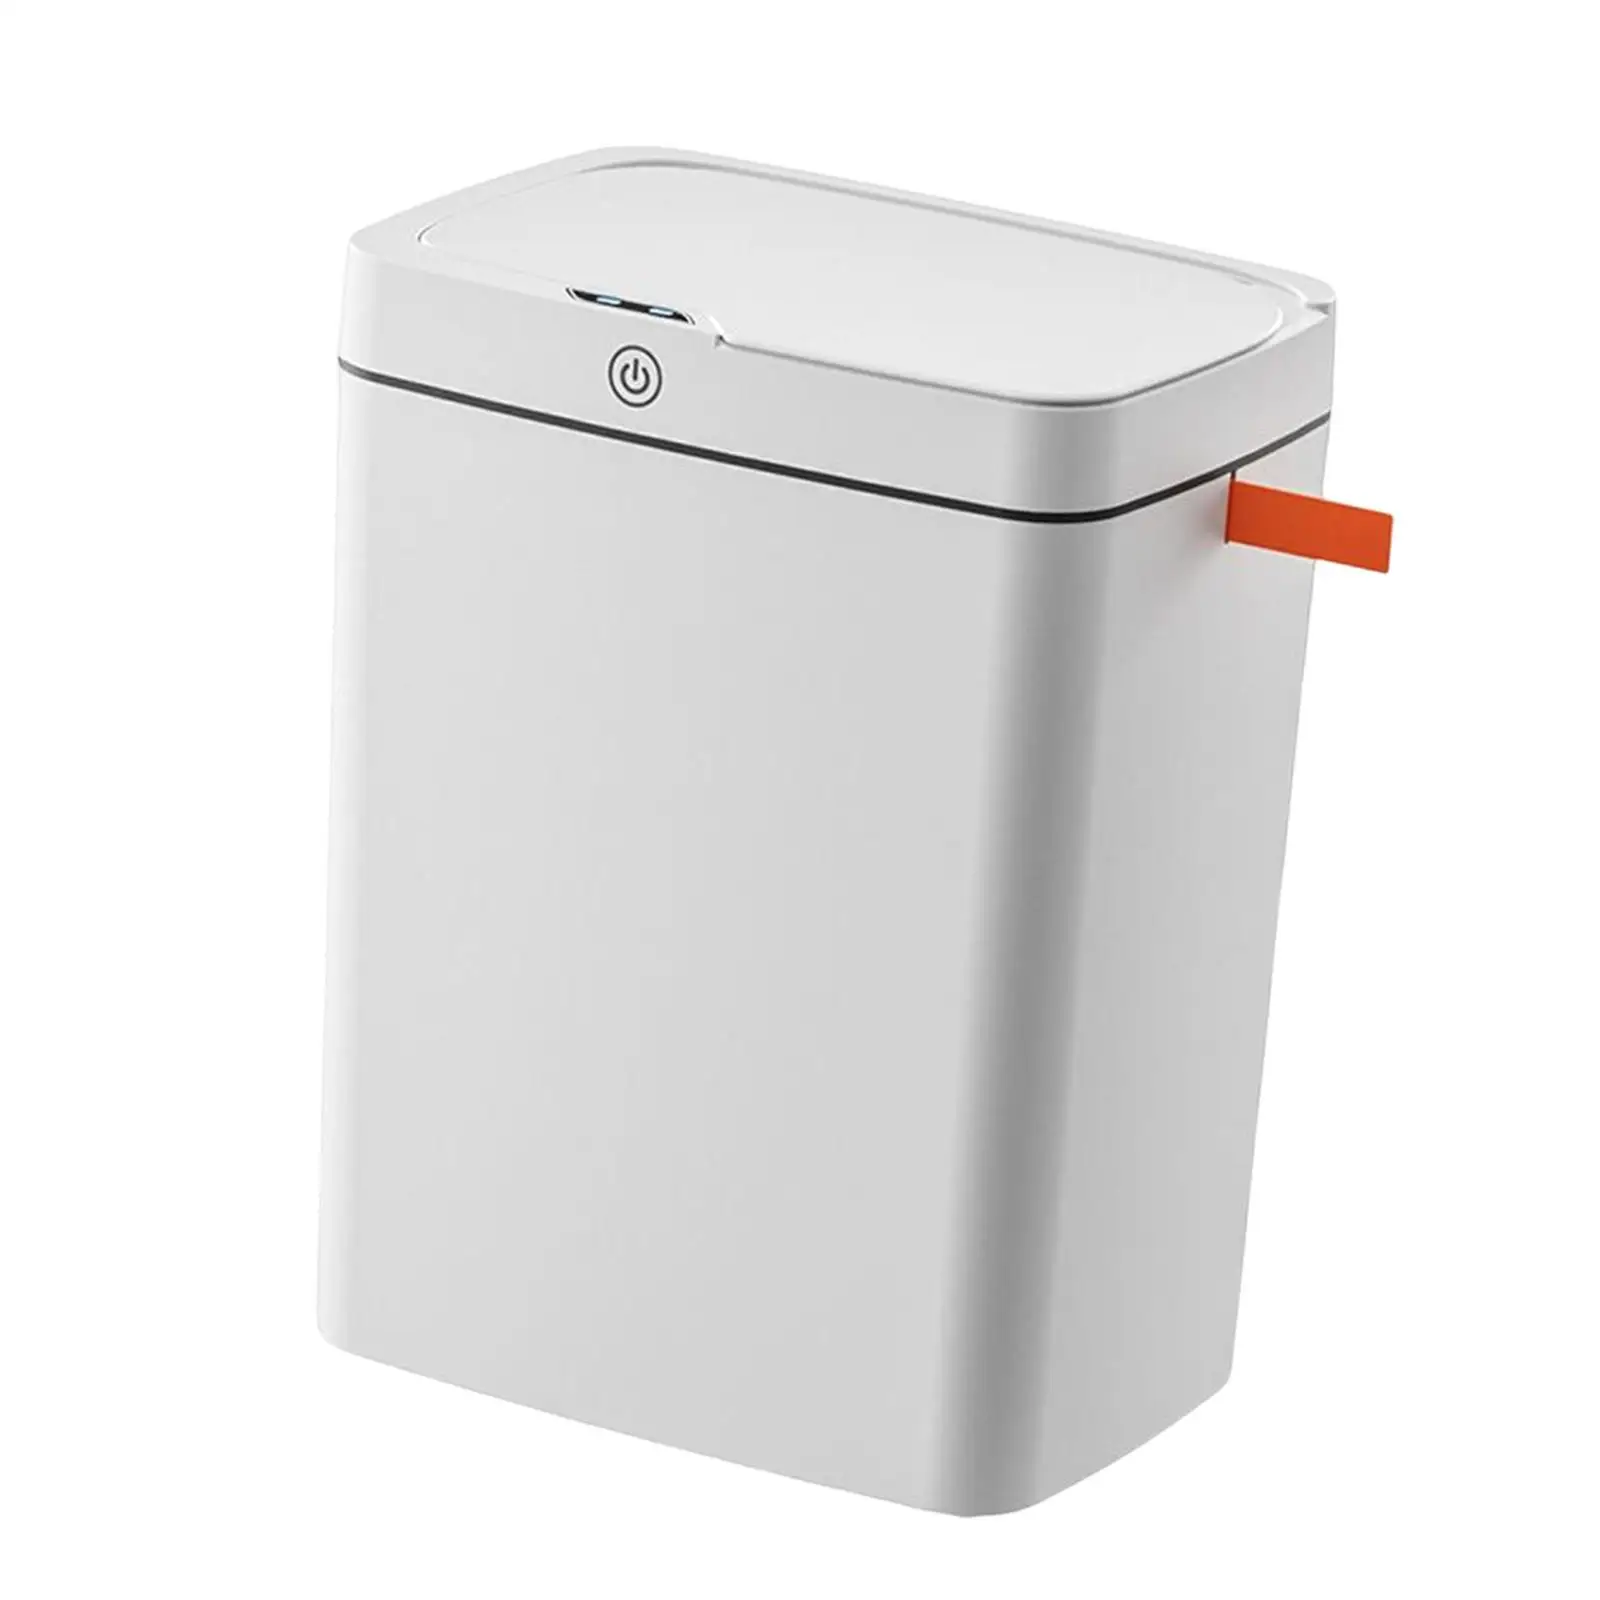 15L Waterproof Motion Sensor Smart Trash Can with Lids Automatic Trash Can Touchless Garbage Container Bin for Kitchen Office RV